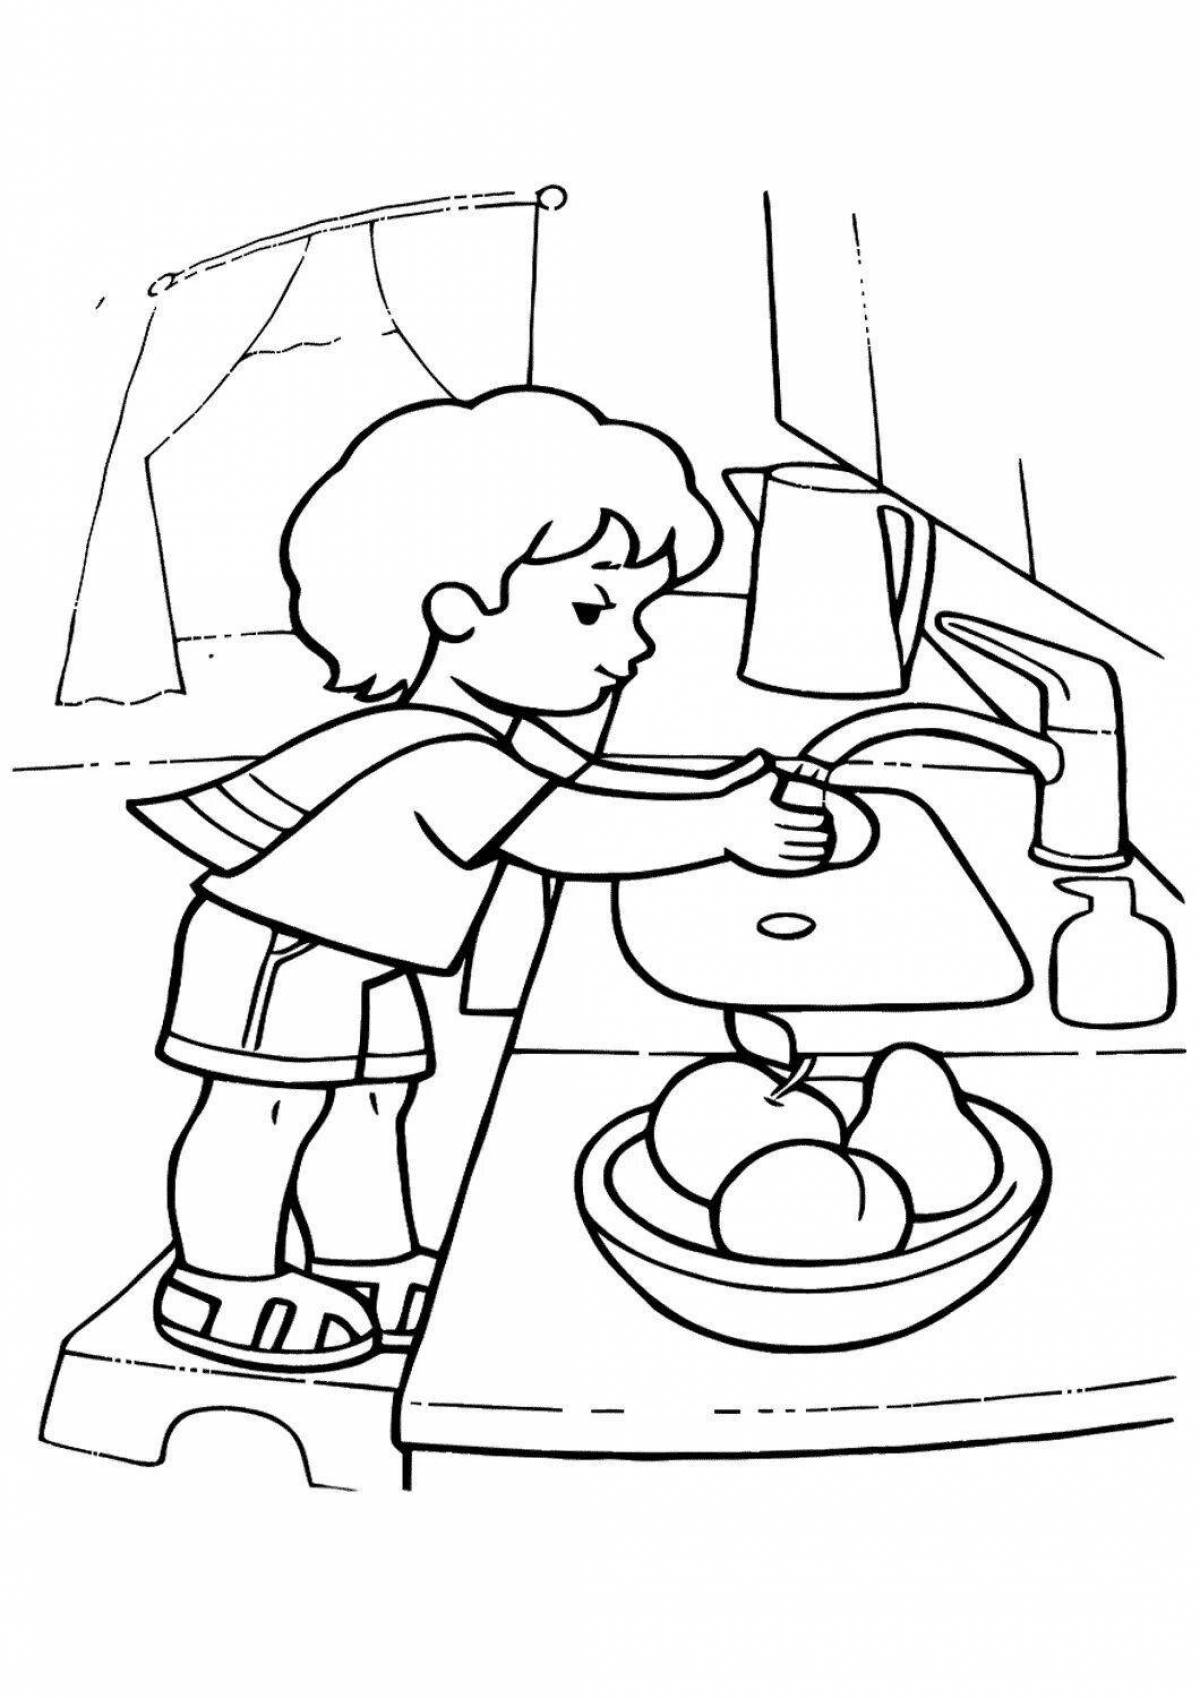 Inspirational coloring book to help parents